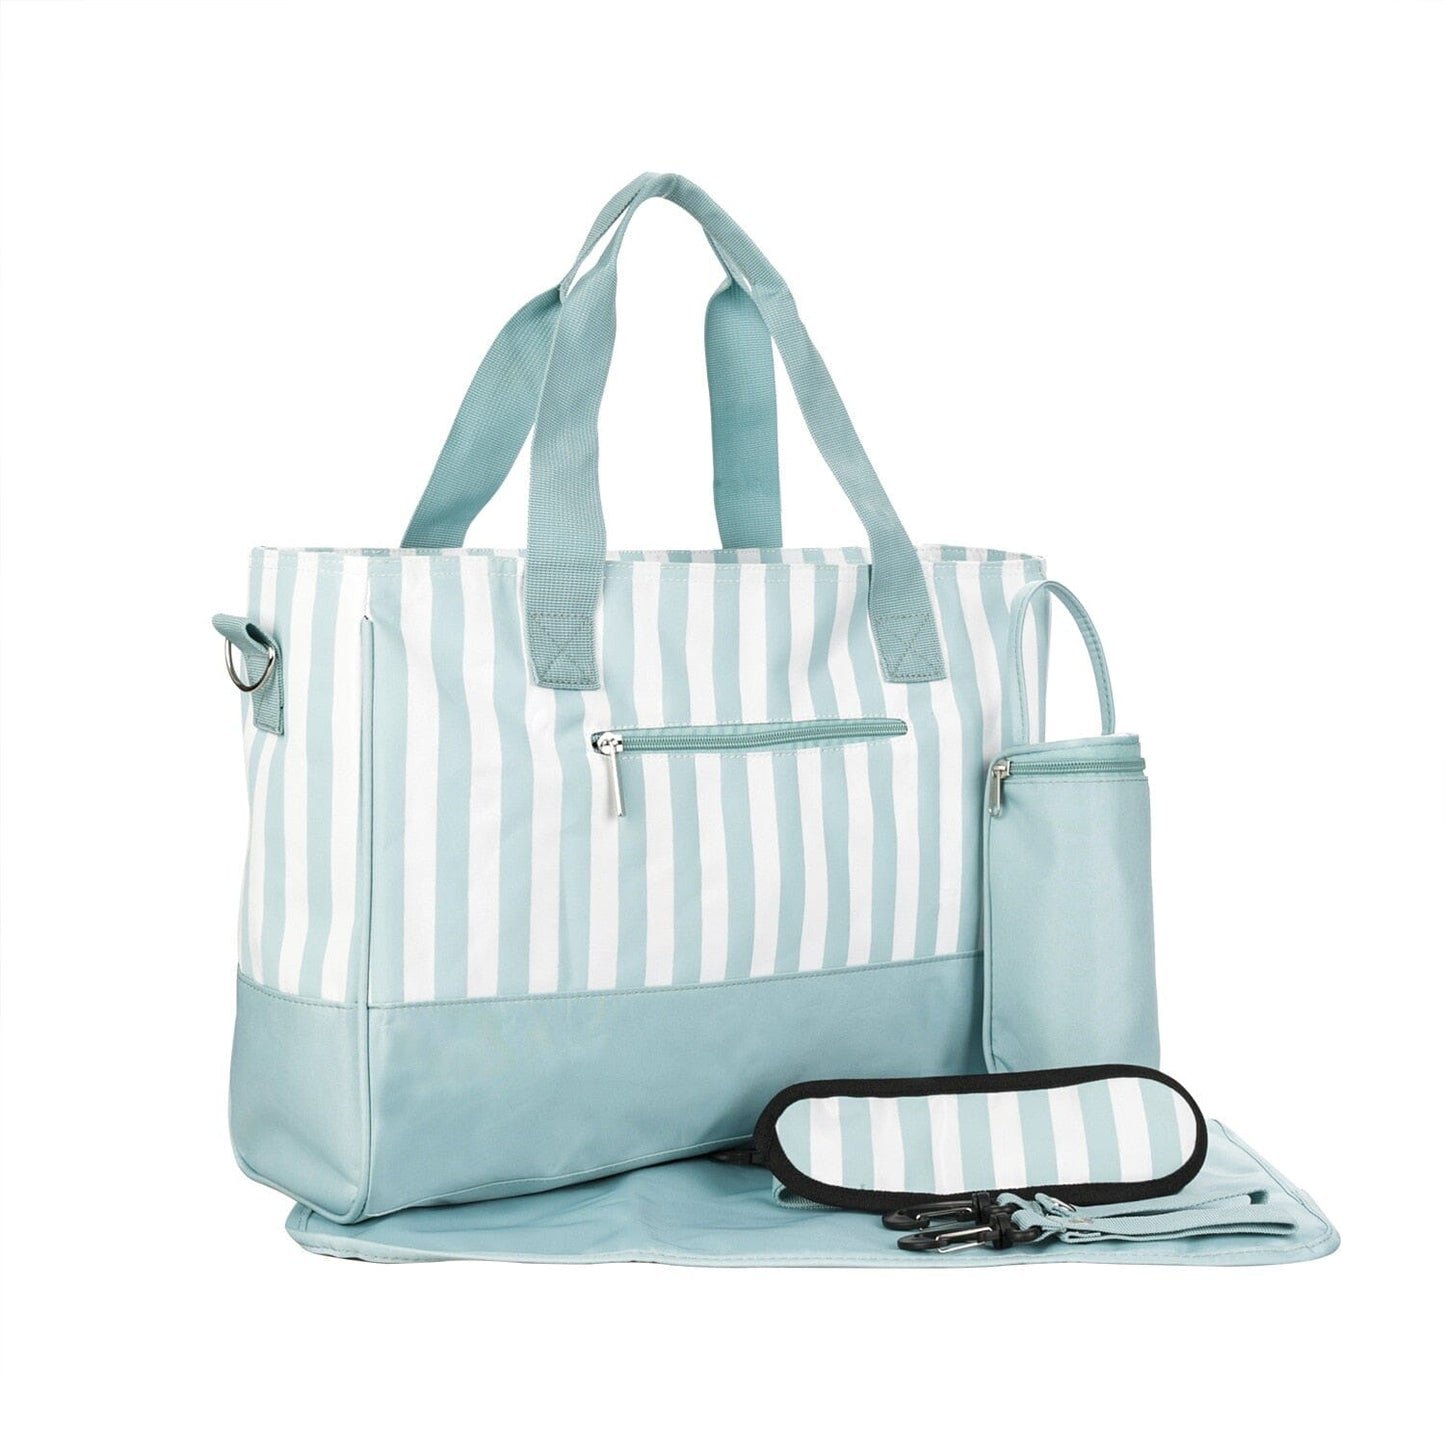 Navy Blue And White Striped Diaper Bag The Store Bags green 